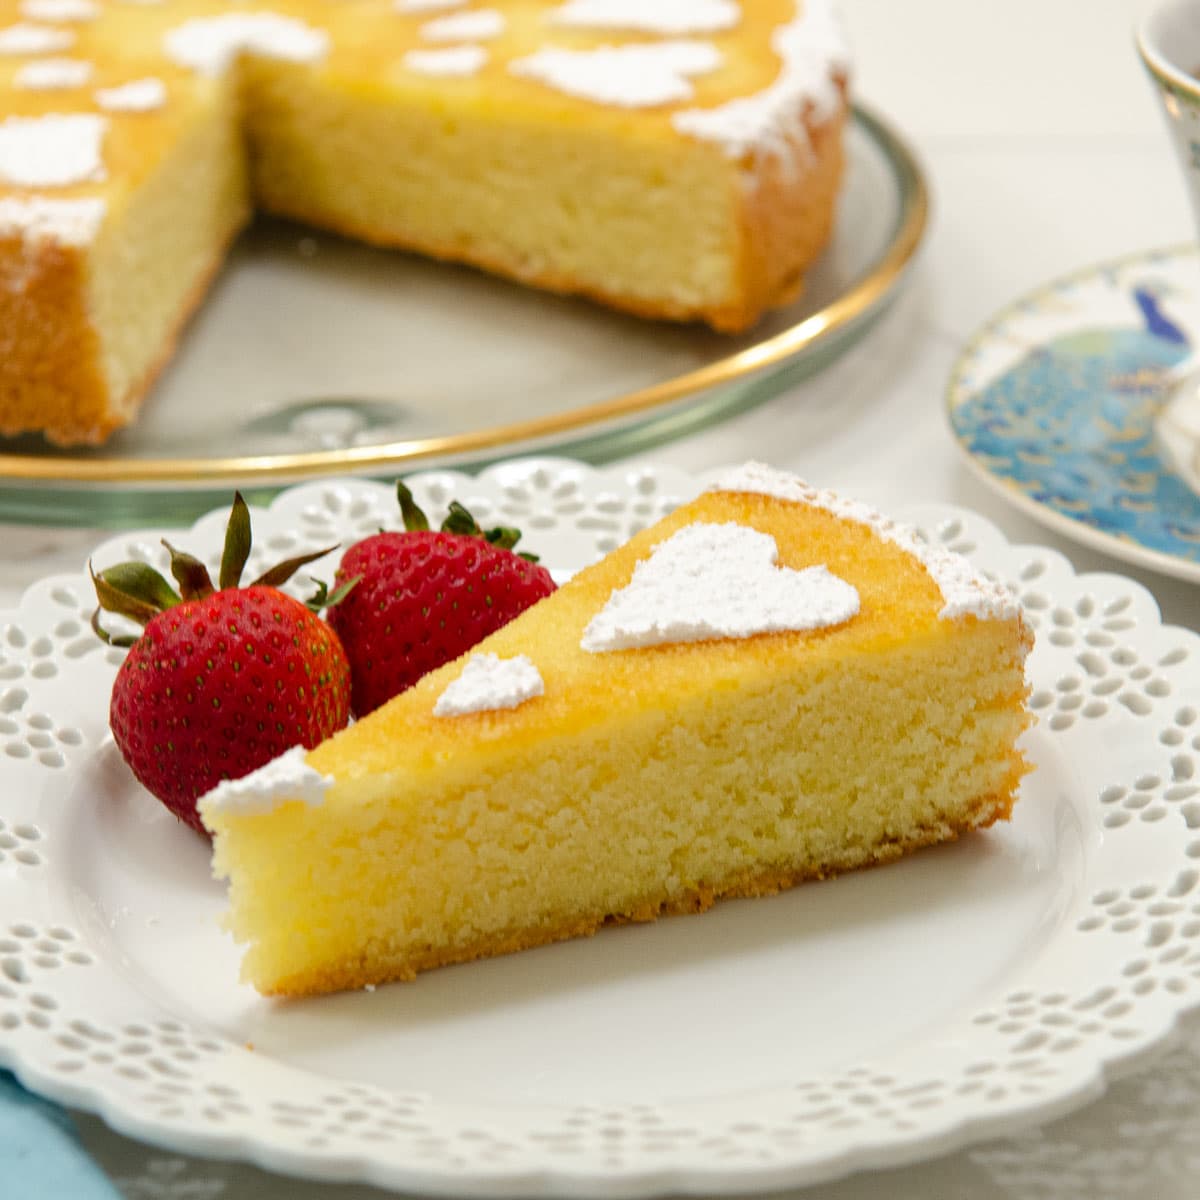 A slice of Orange Almond Teacake on a plate with strawberries.